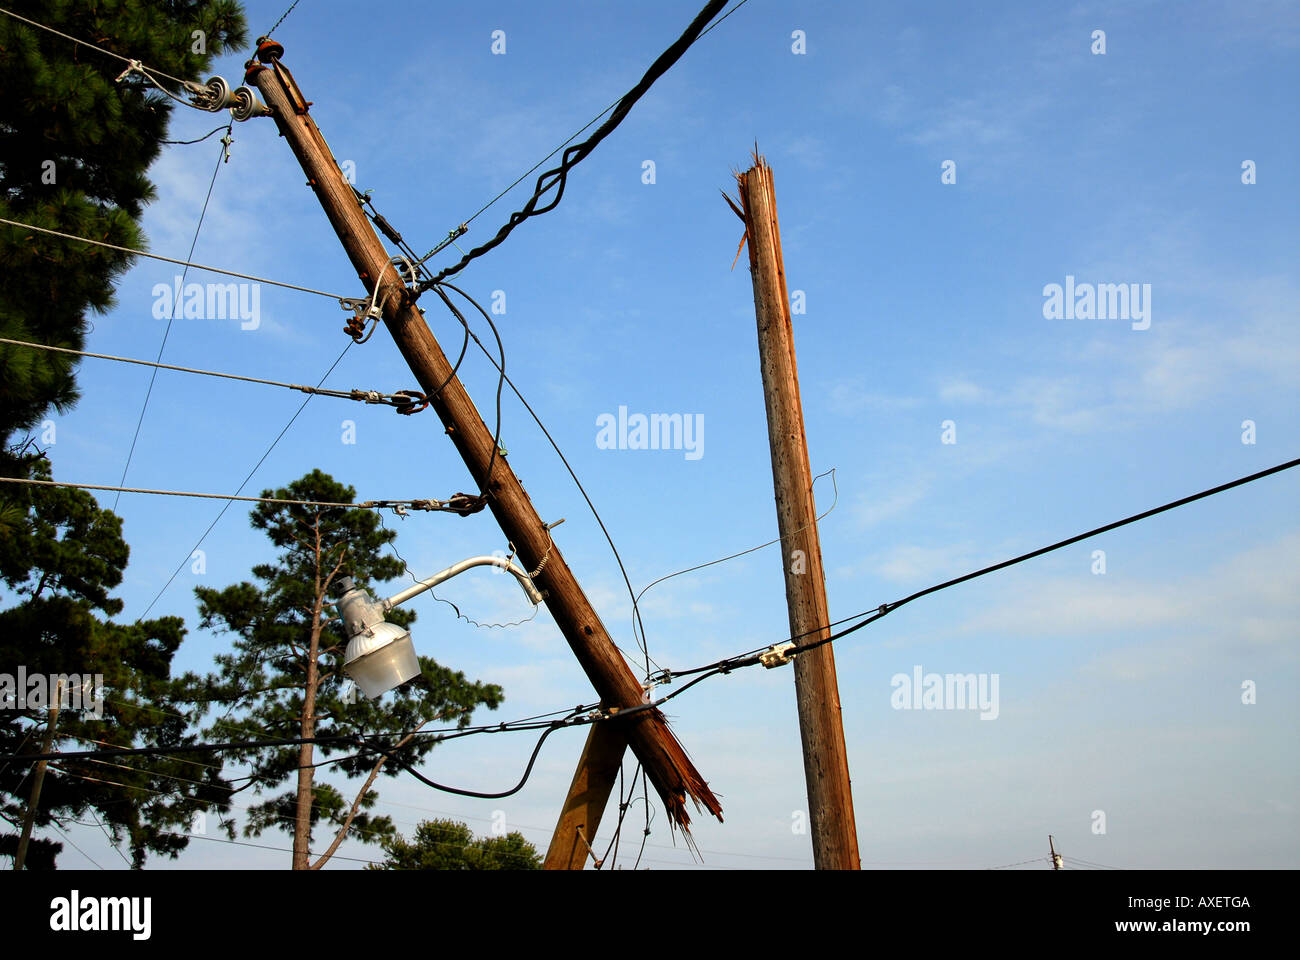 Storm damage hurricane electric power pole snapped by strong wind Stock Photo